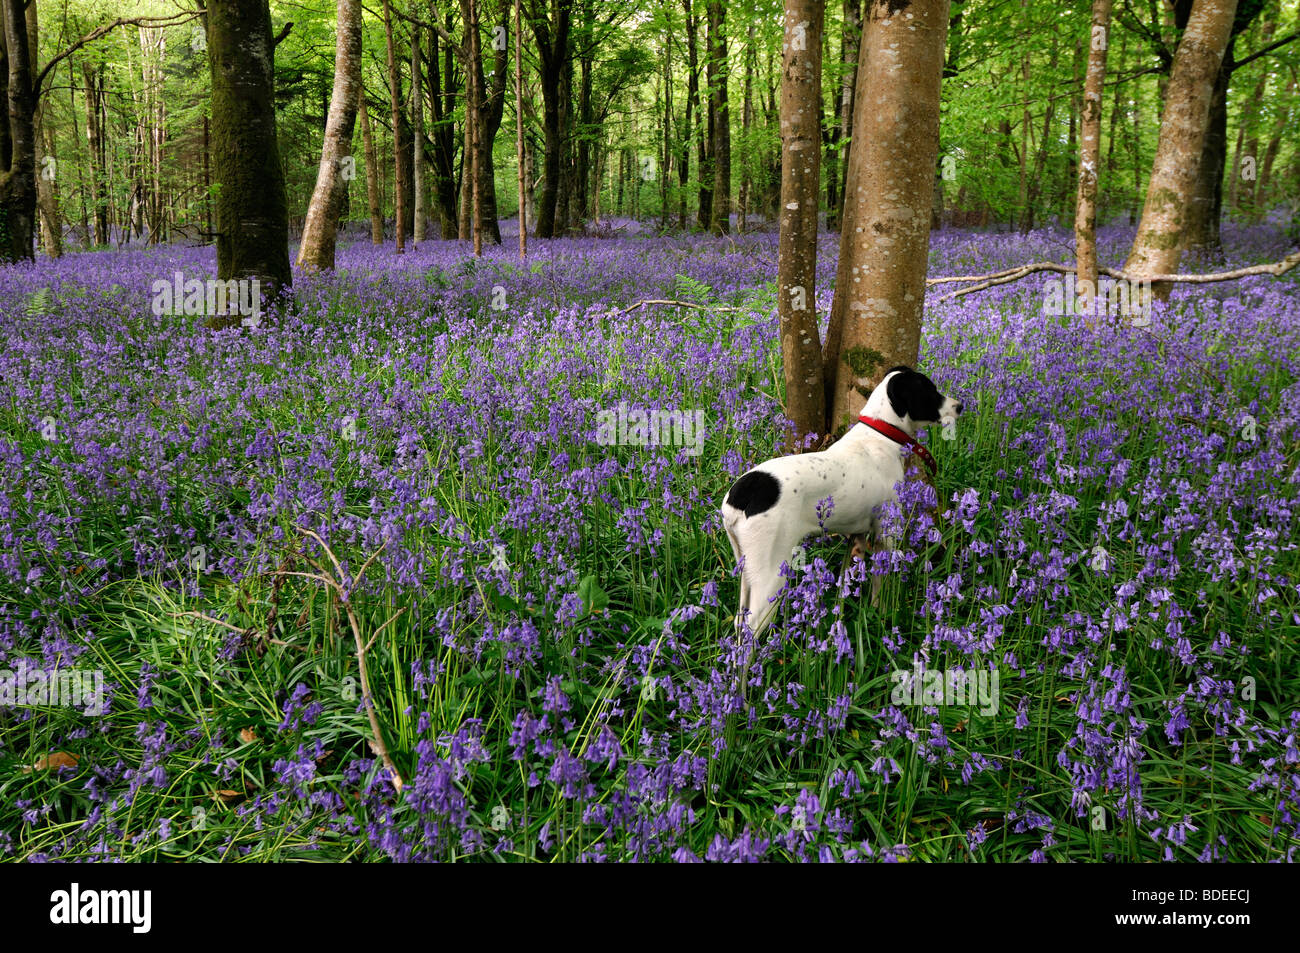 White dog standing to attention watching watch Carpet of bluebells in Jenkinstown Wood County Kilkenny Ireland Stock Photo